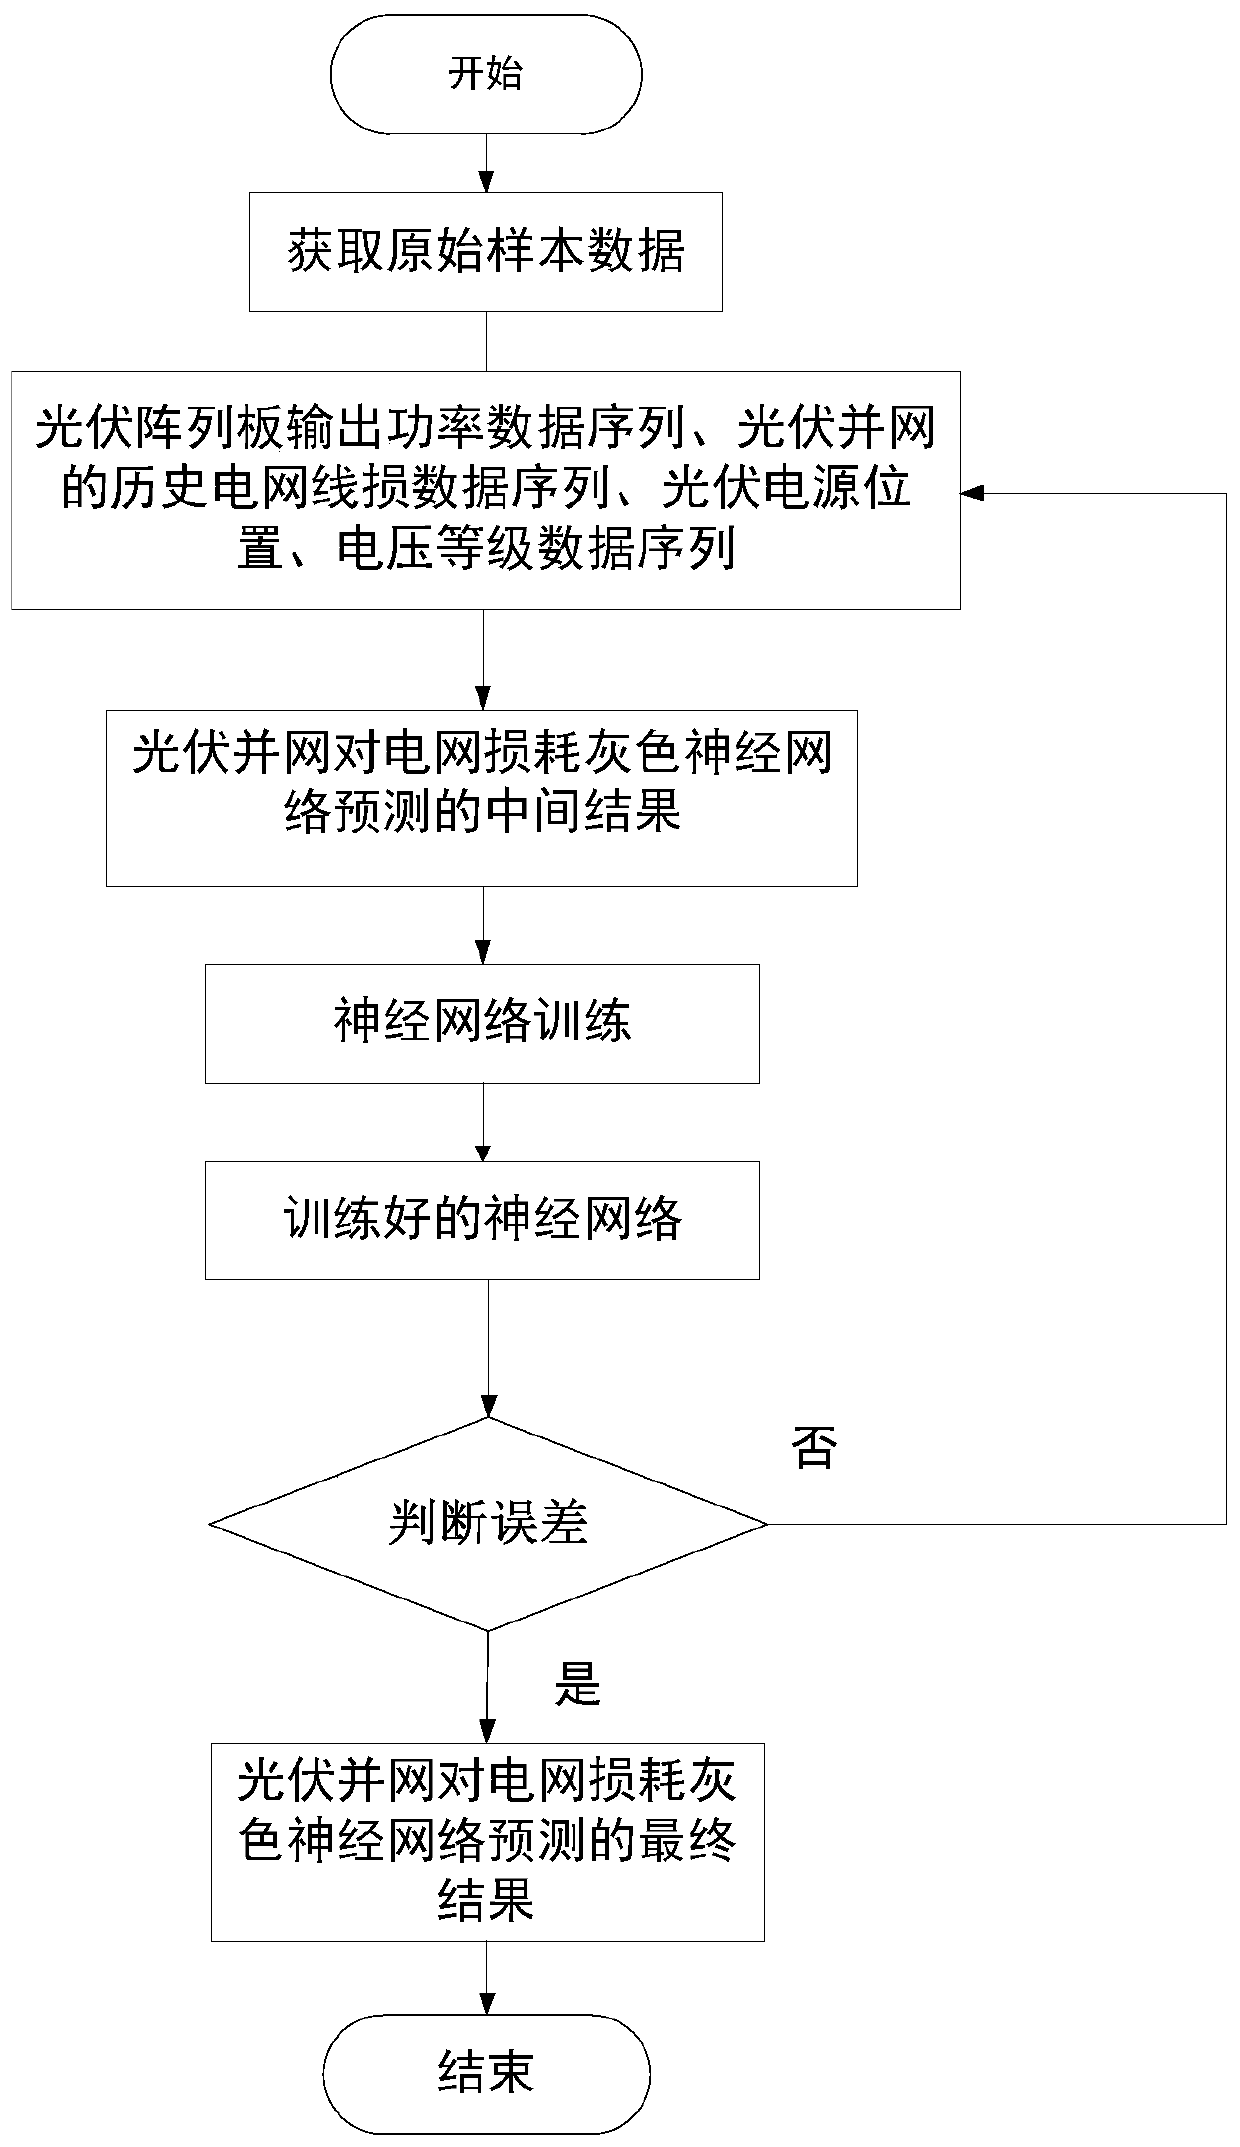 Photovoltaic grid-connected power grid line loss prediction method based on gray neural network model